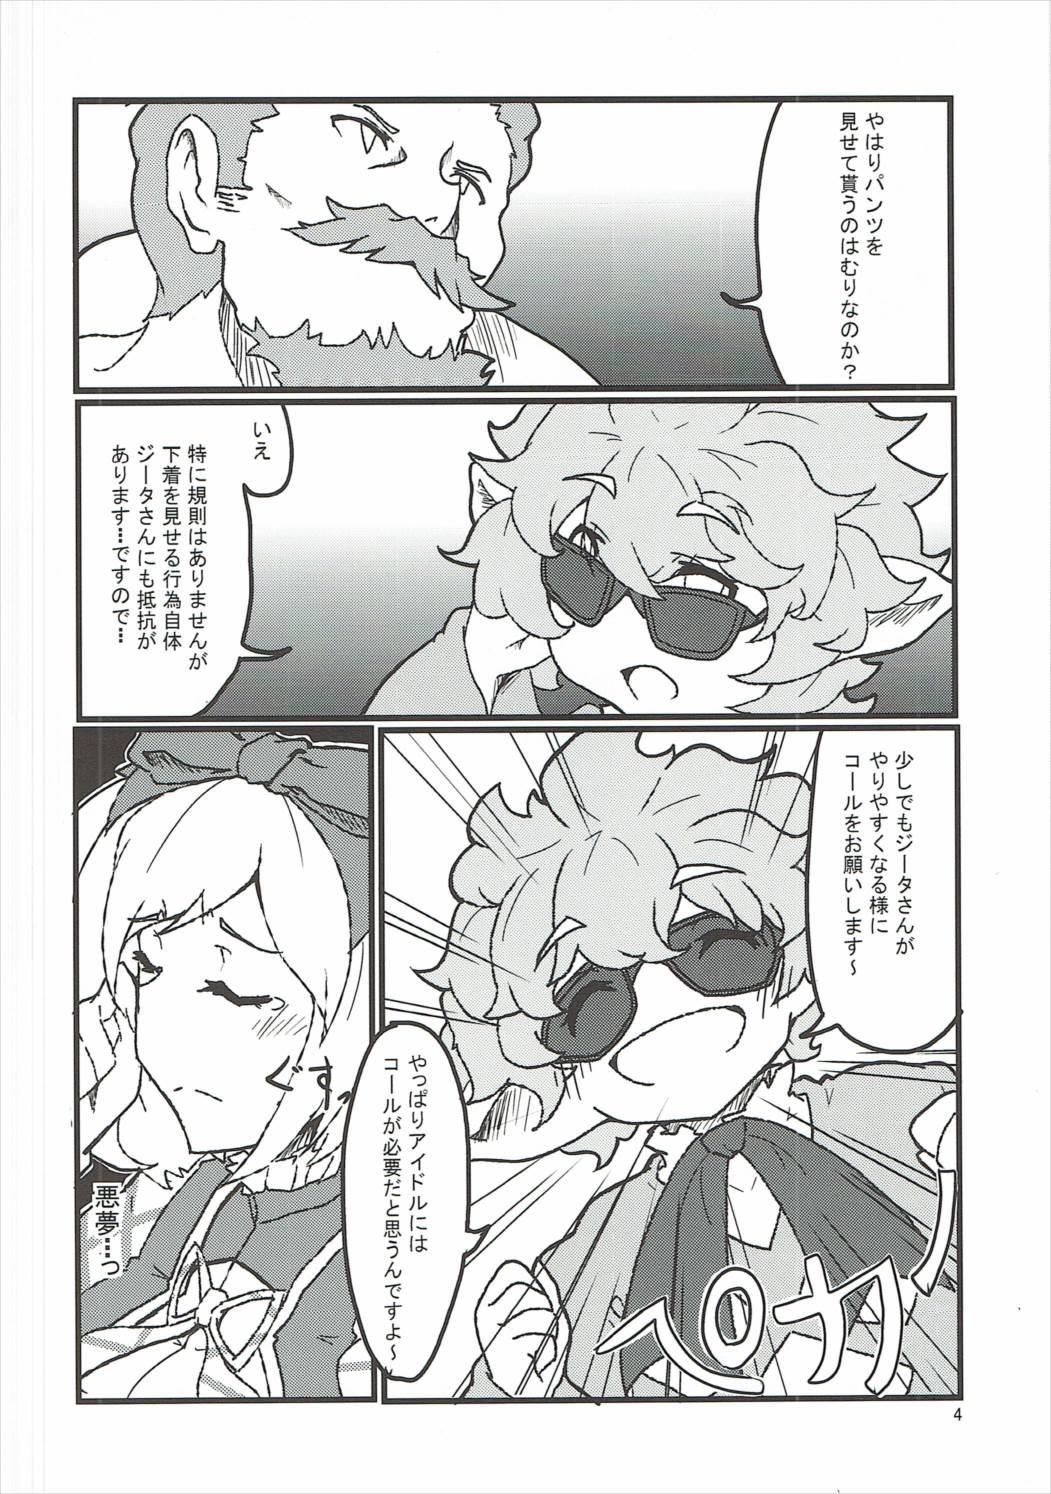 Russian Surprise Ticket - Granblue fantasy Squirt - Page 5